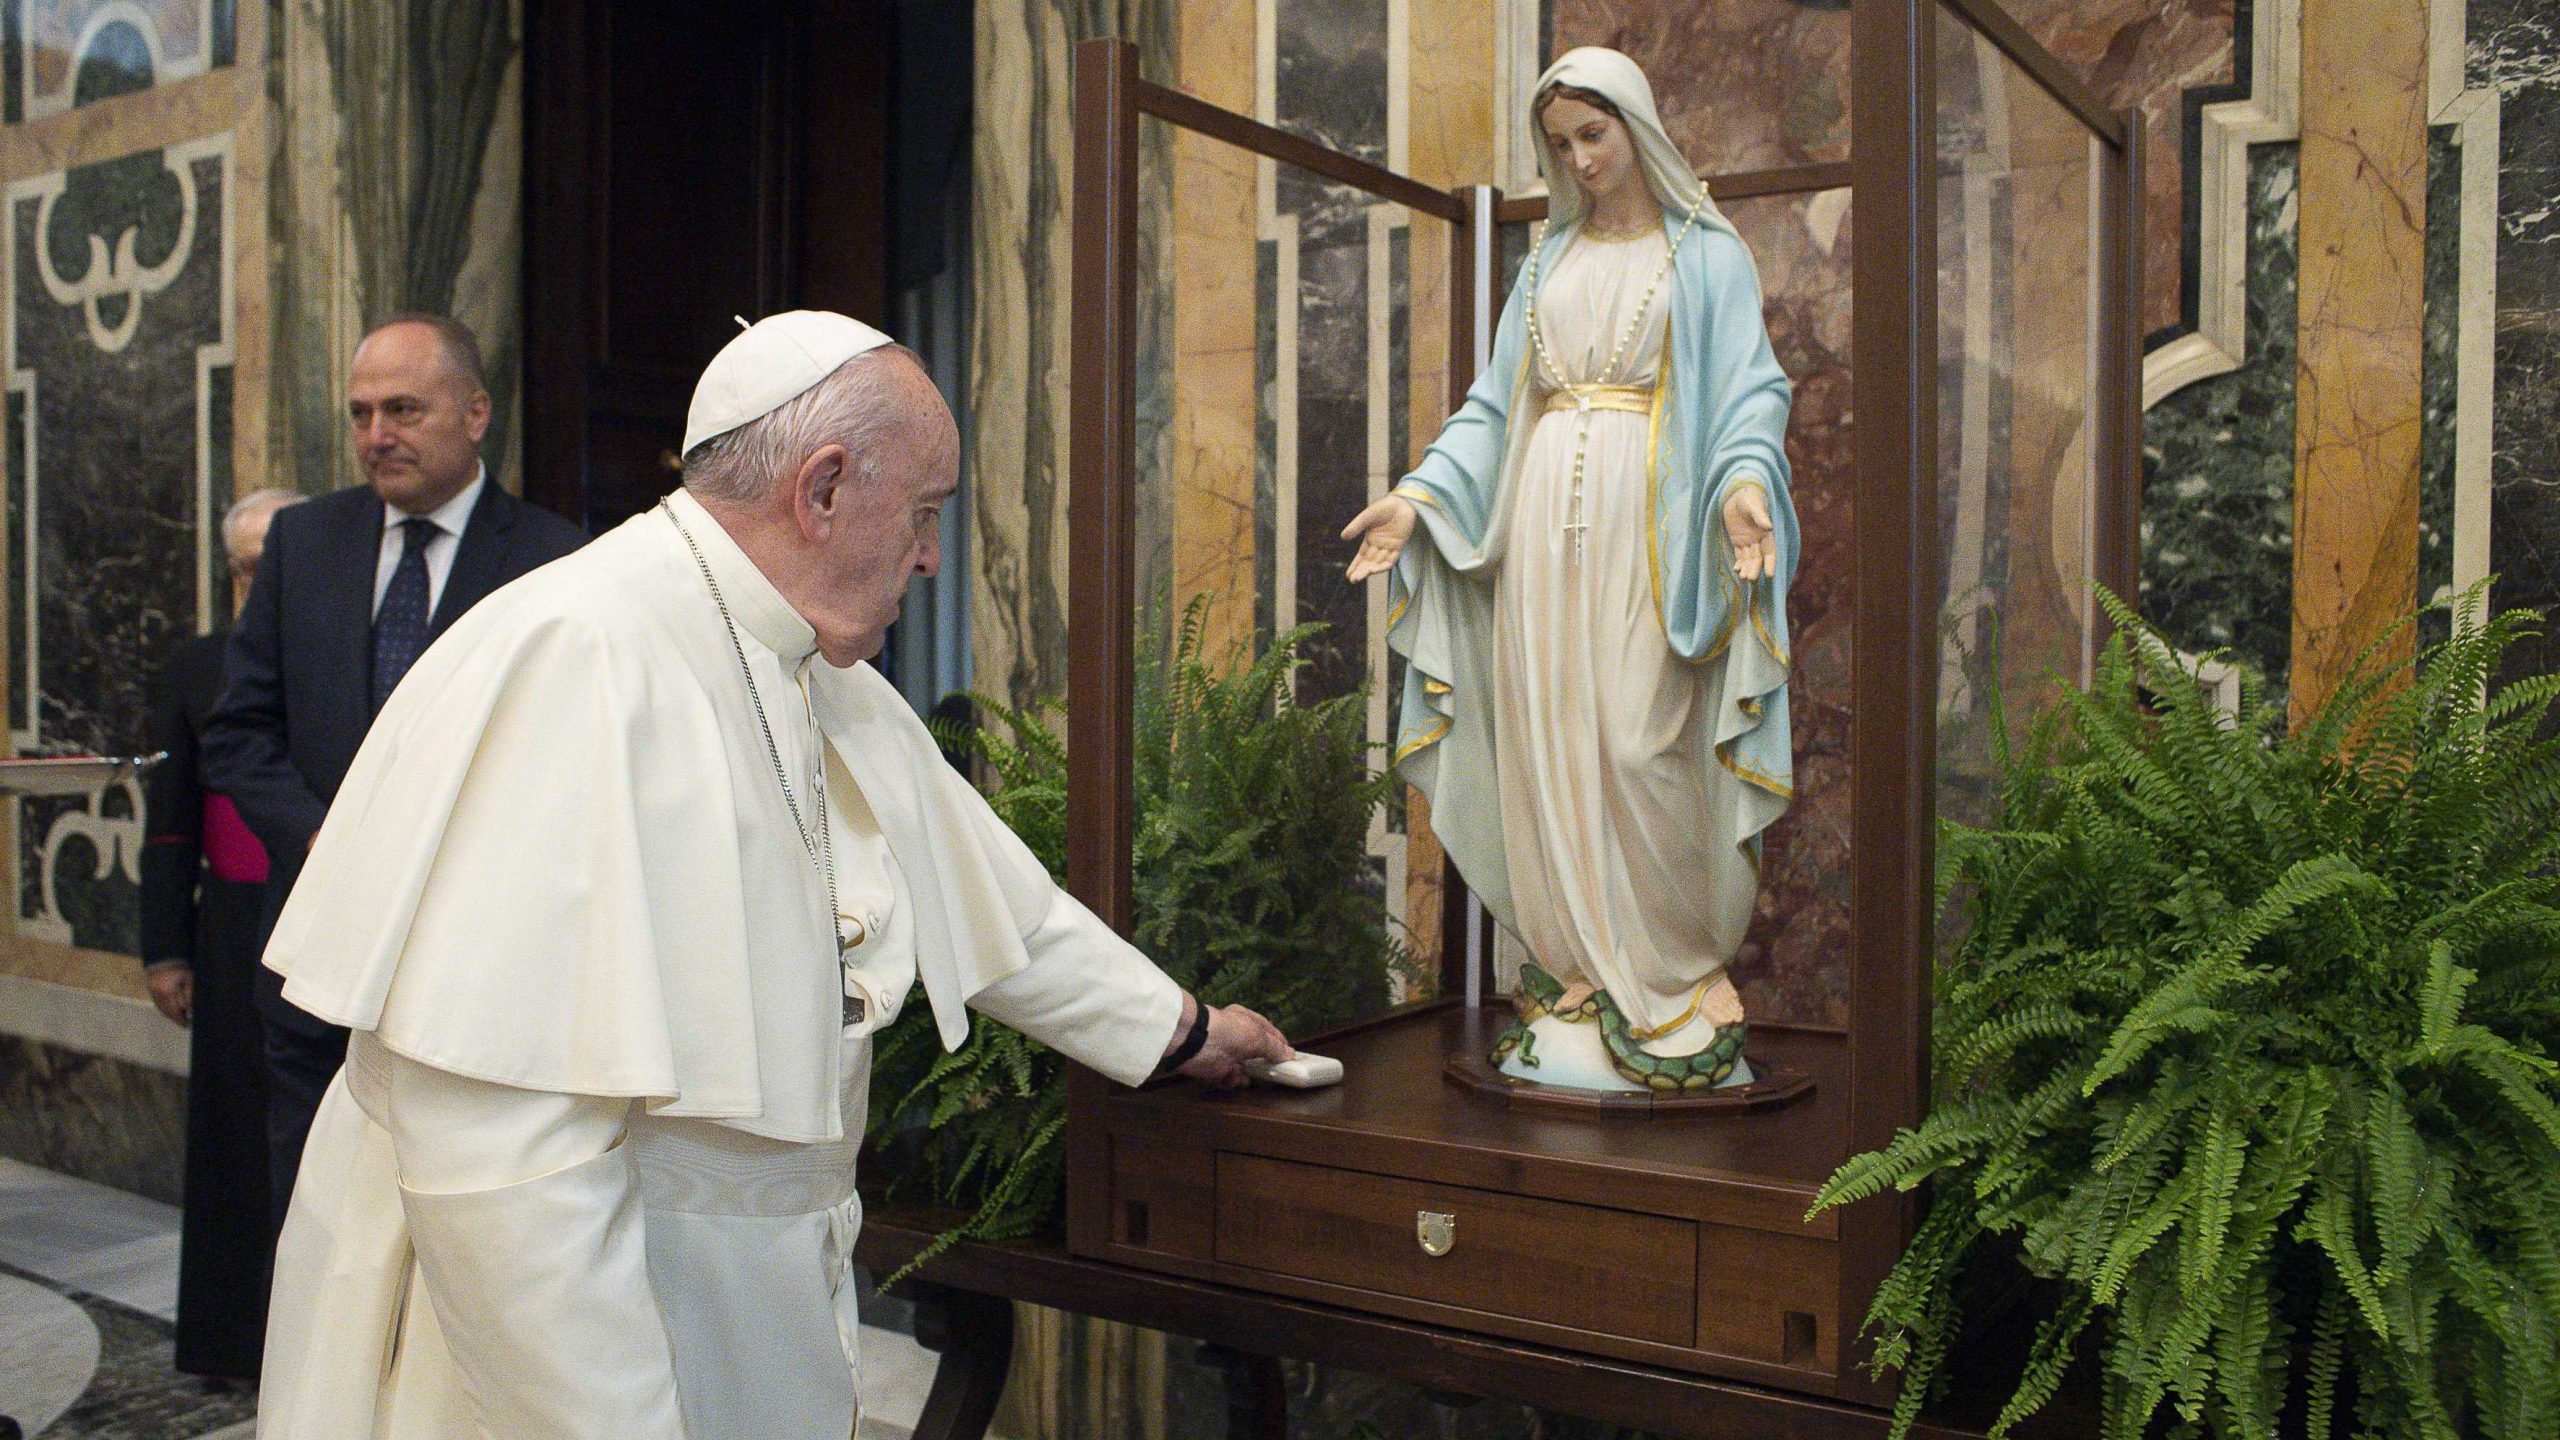 Our Lady of the Miraculous Medal Statue